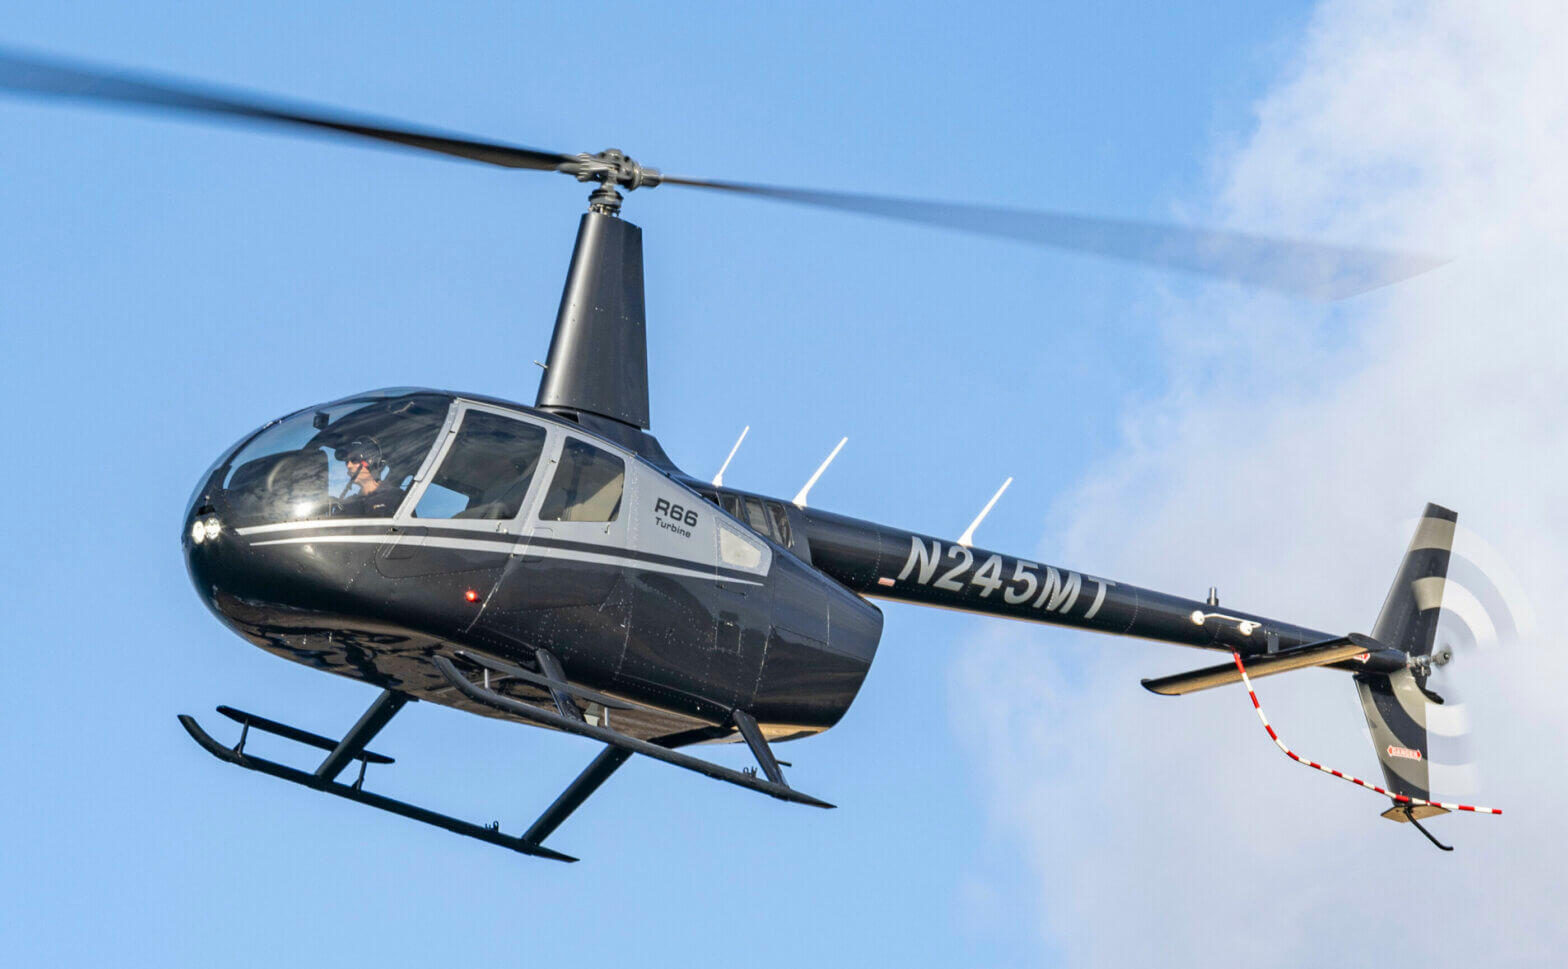 Robinson Helicopter Company criticizes FAA’s proposed MOSAIC rules